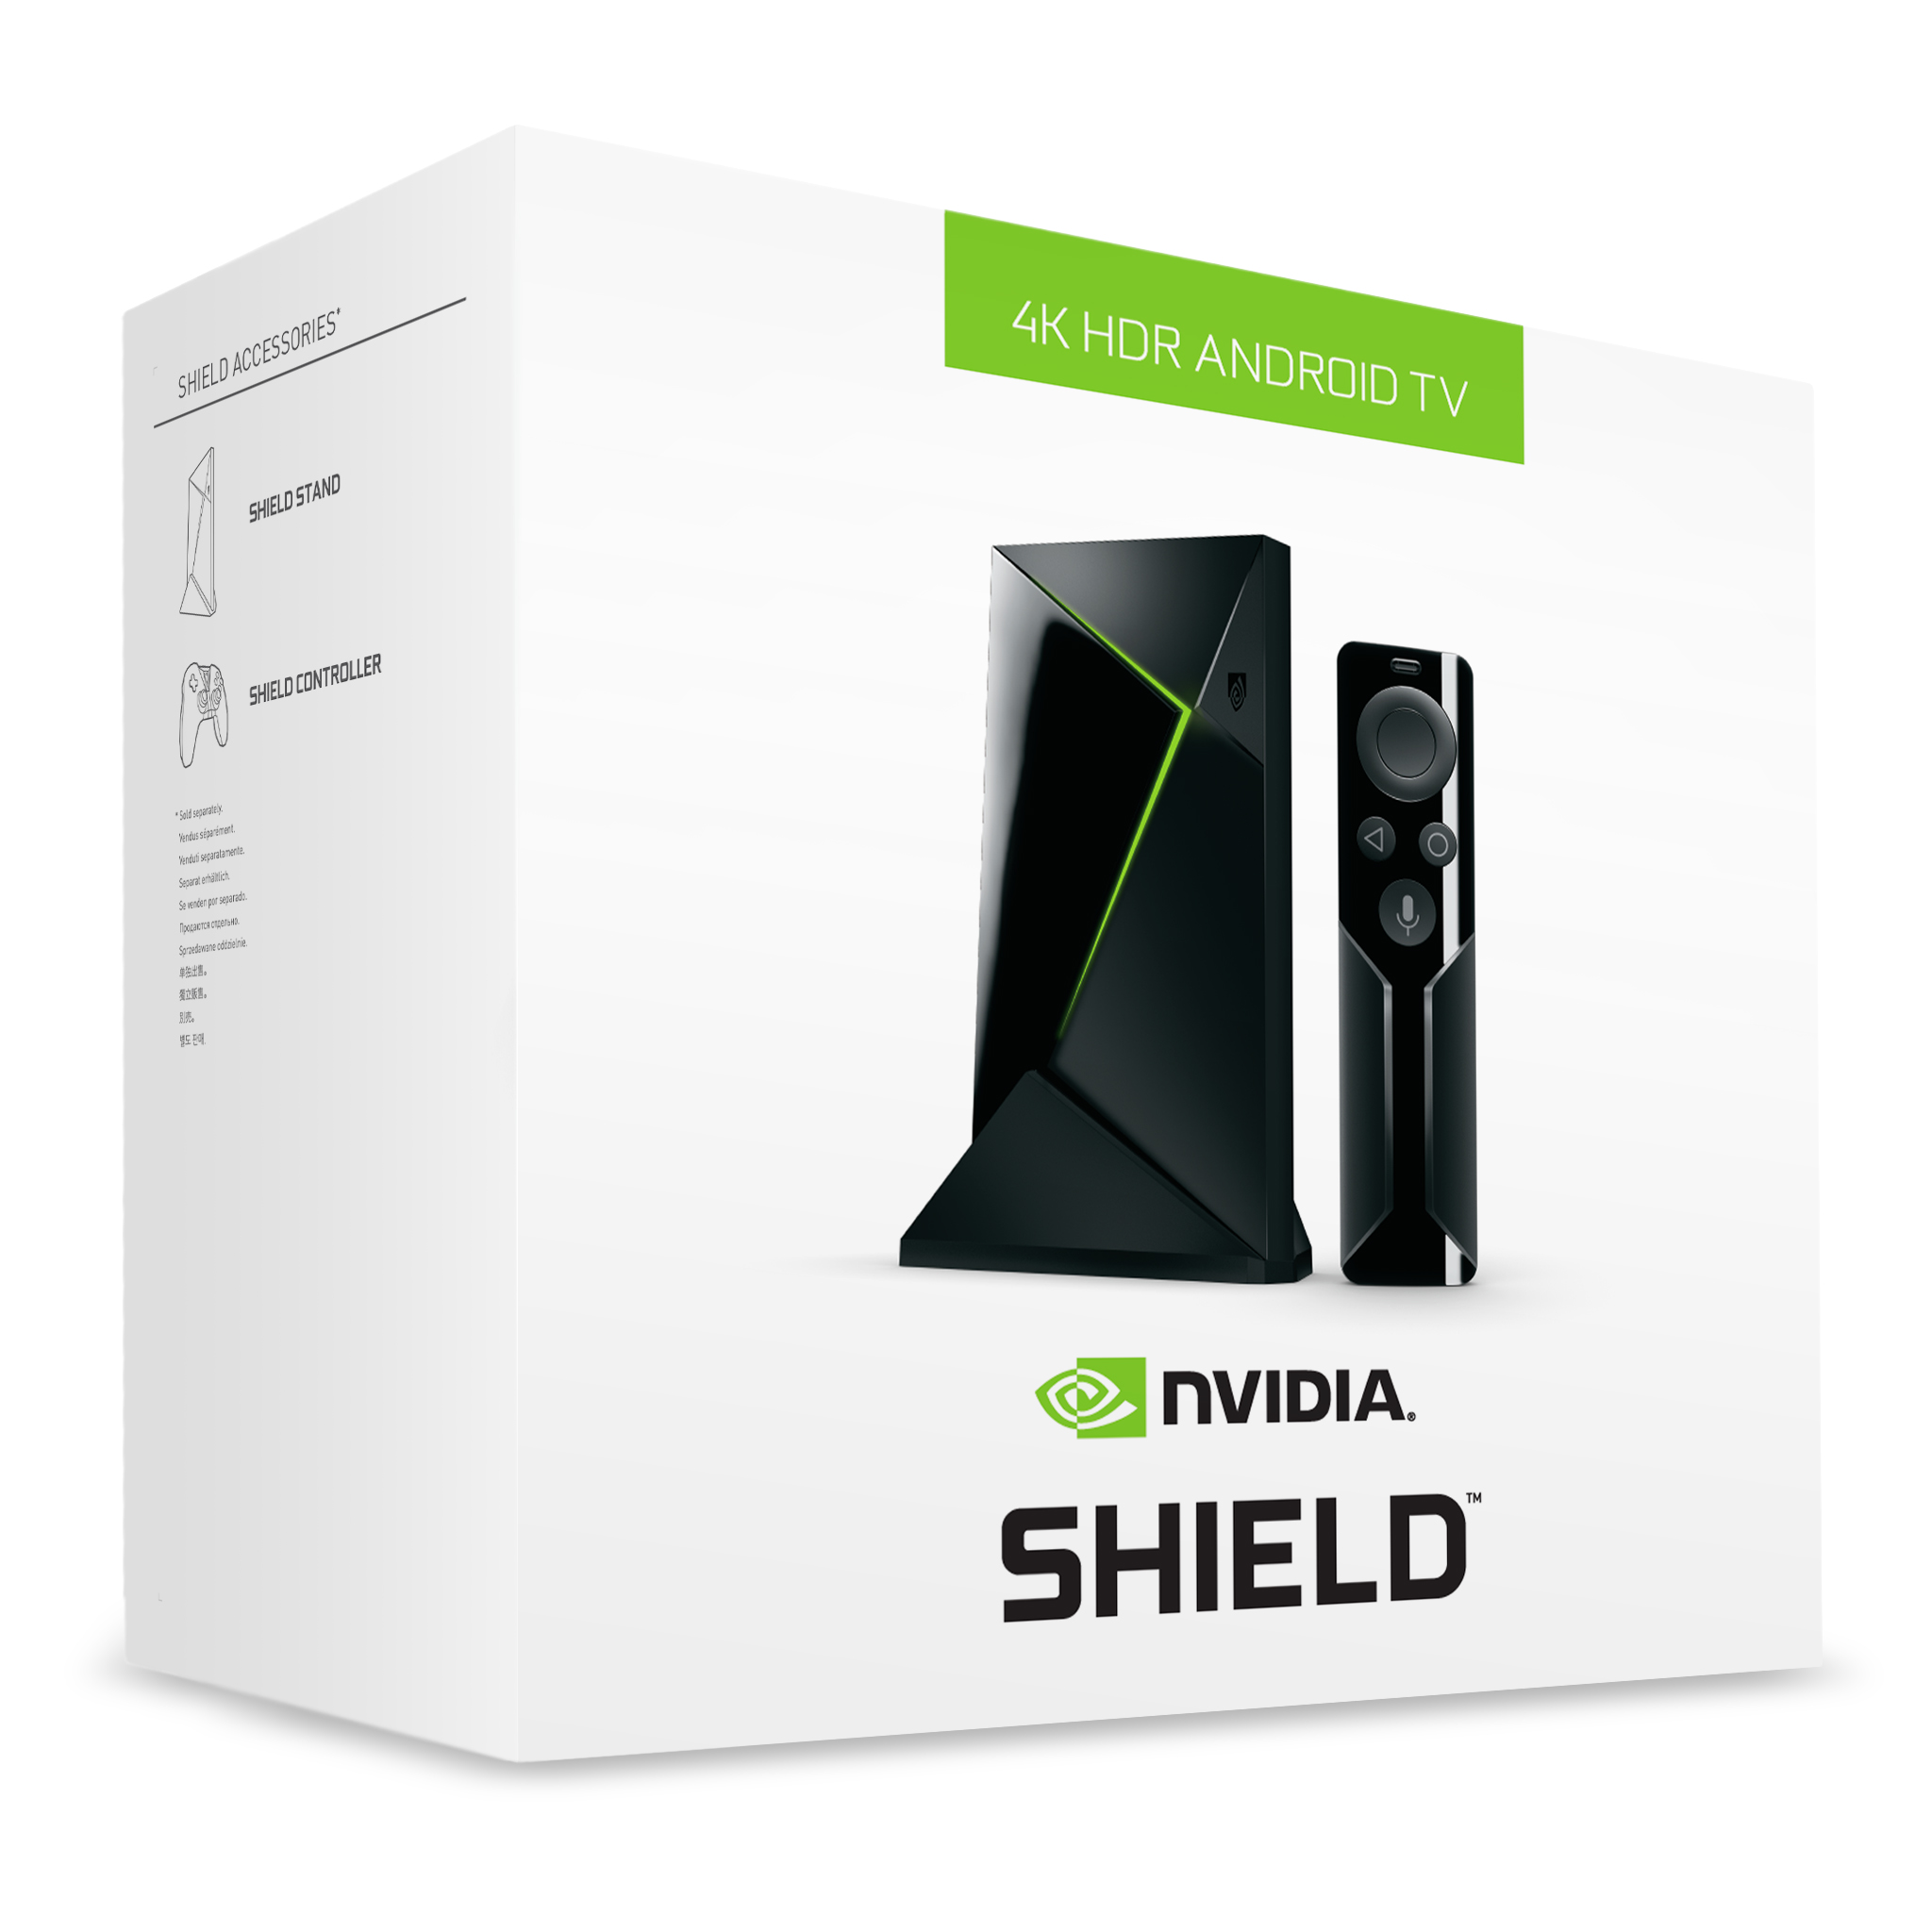 Nvidia Shield TV gets a new, lower price ahead of Apple TV 4K